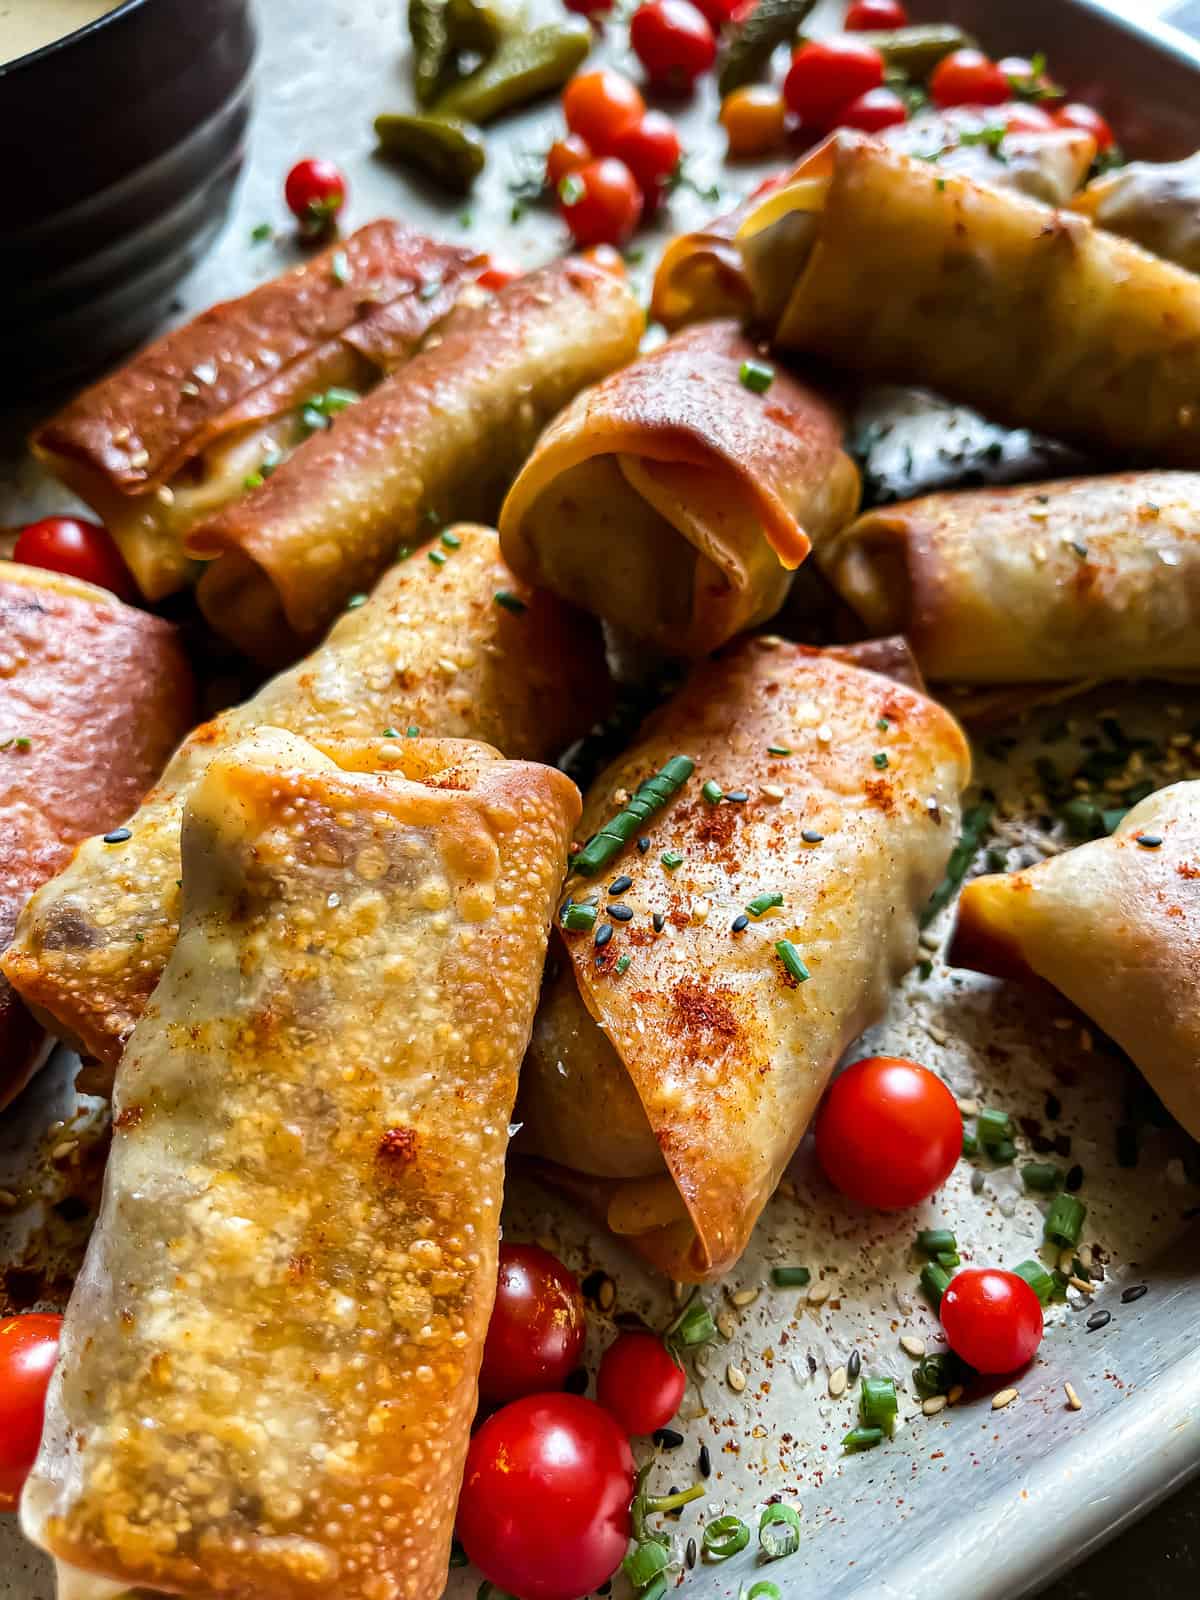 egg rolls garnished with sesame seeds, herbs, spices, and cherry tomatoes